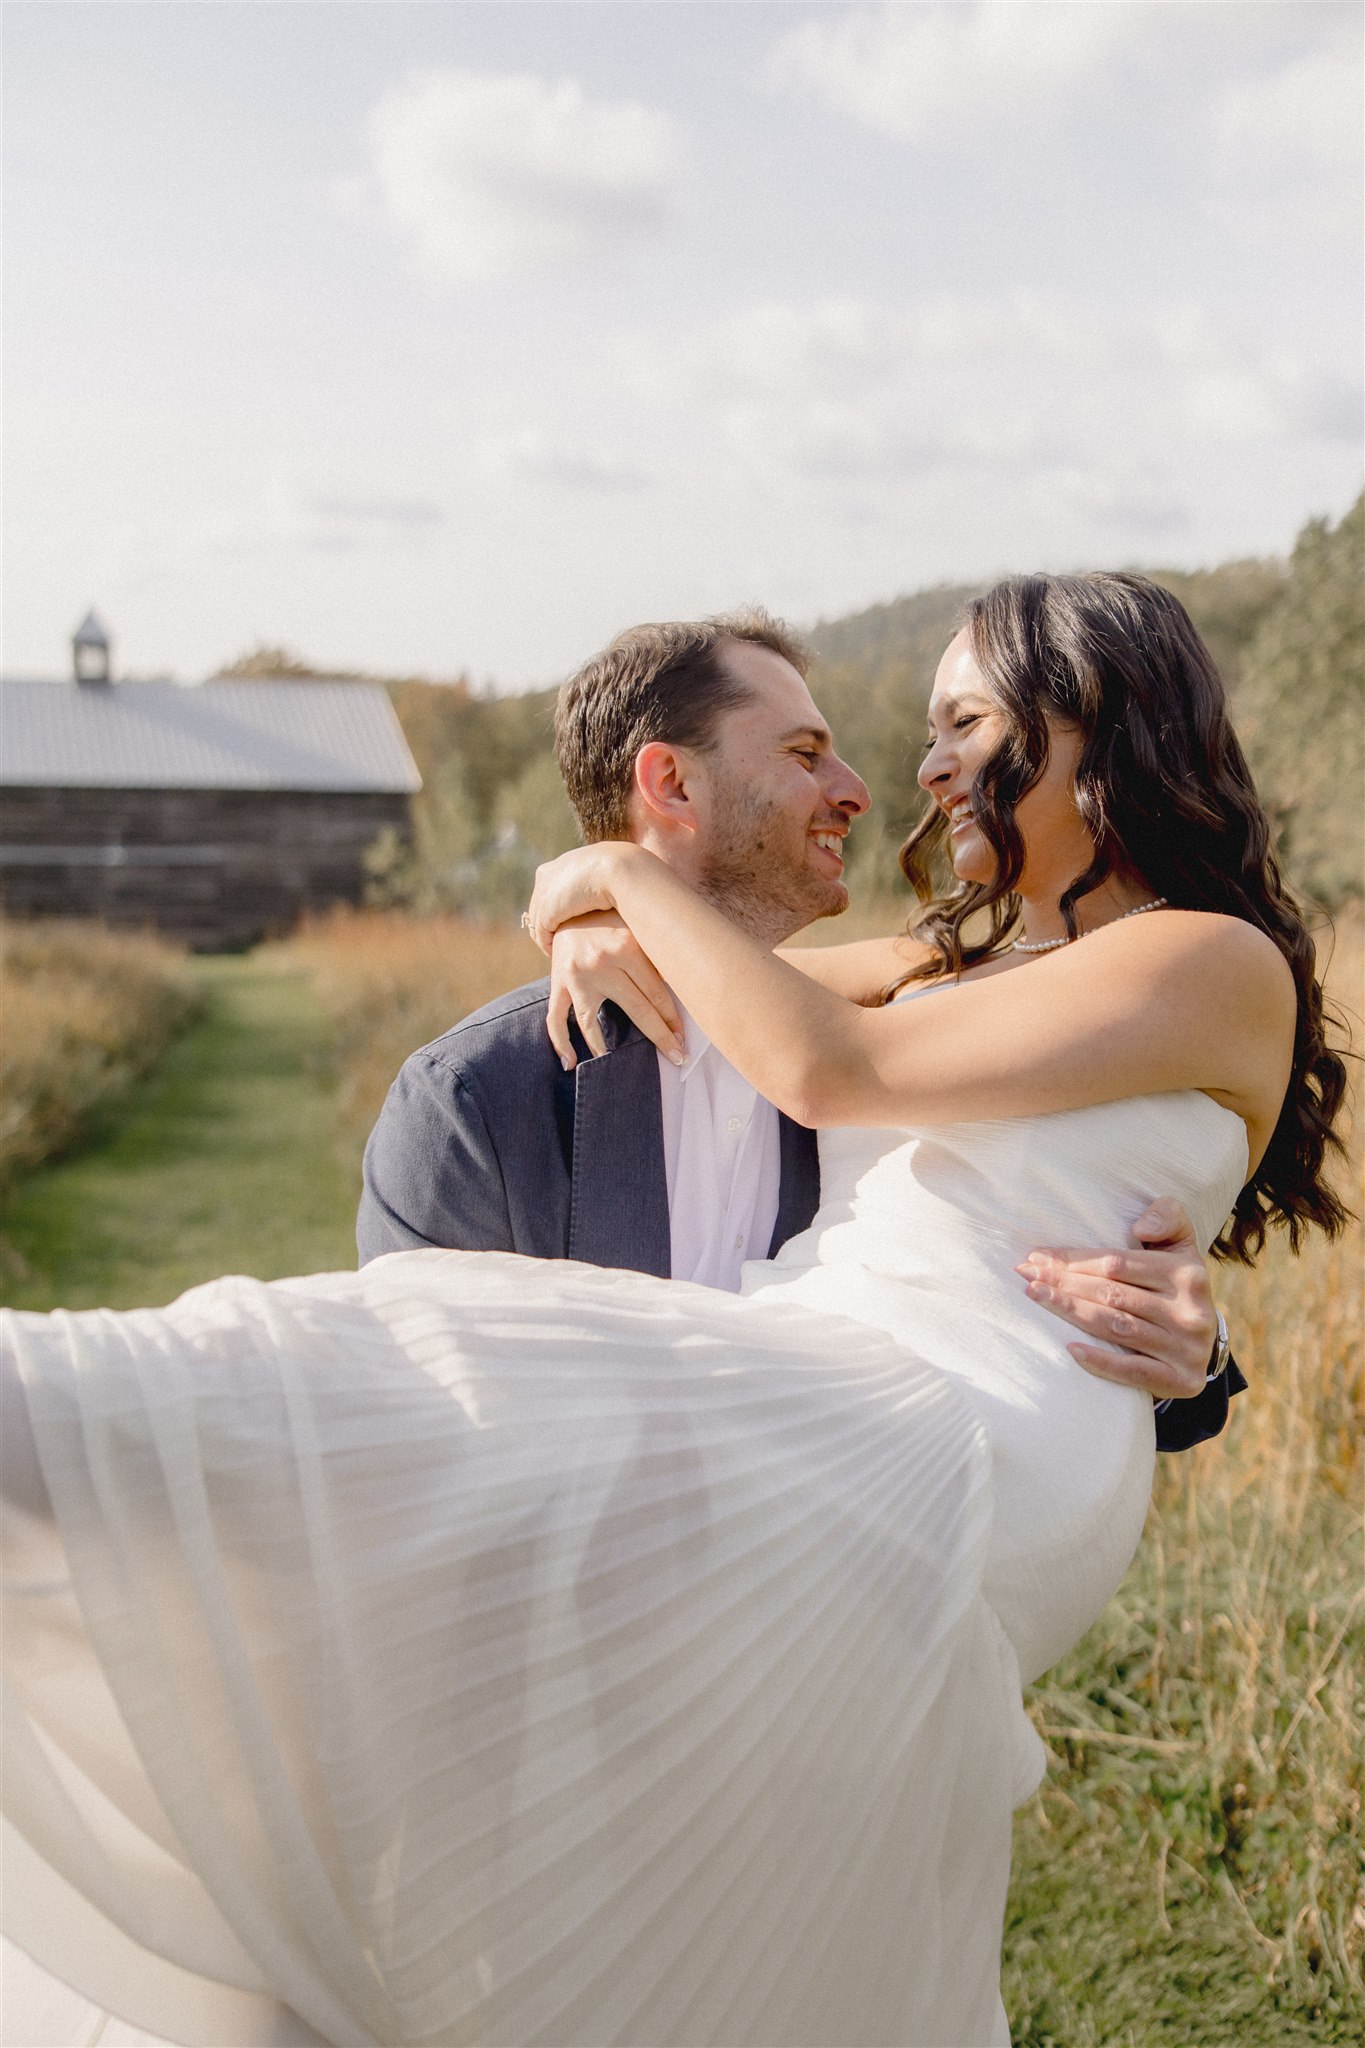 Stunning groom poses with his beautiful bride during their wedding rehearsal dinner photoshoot